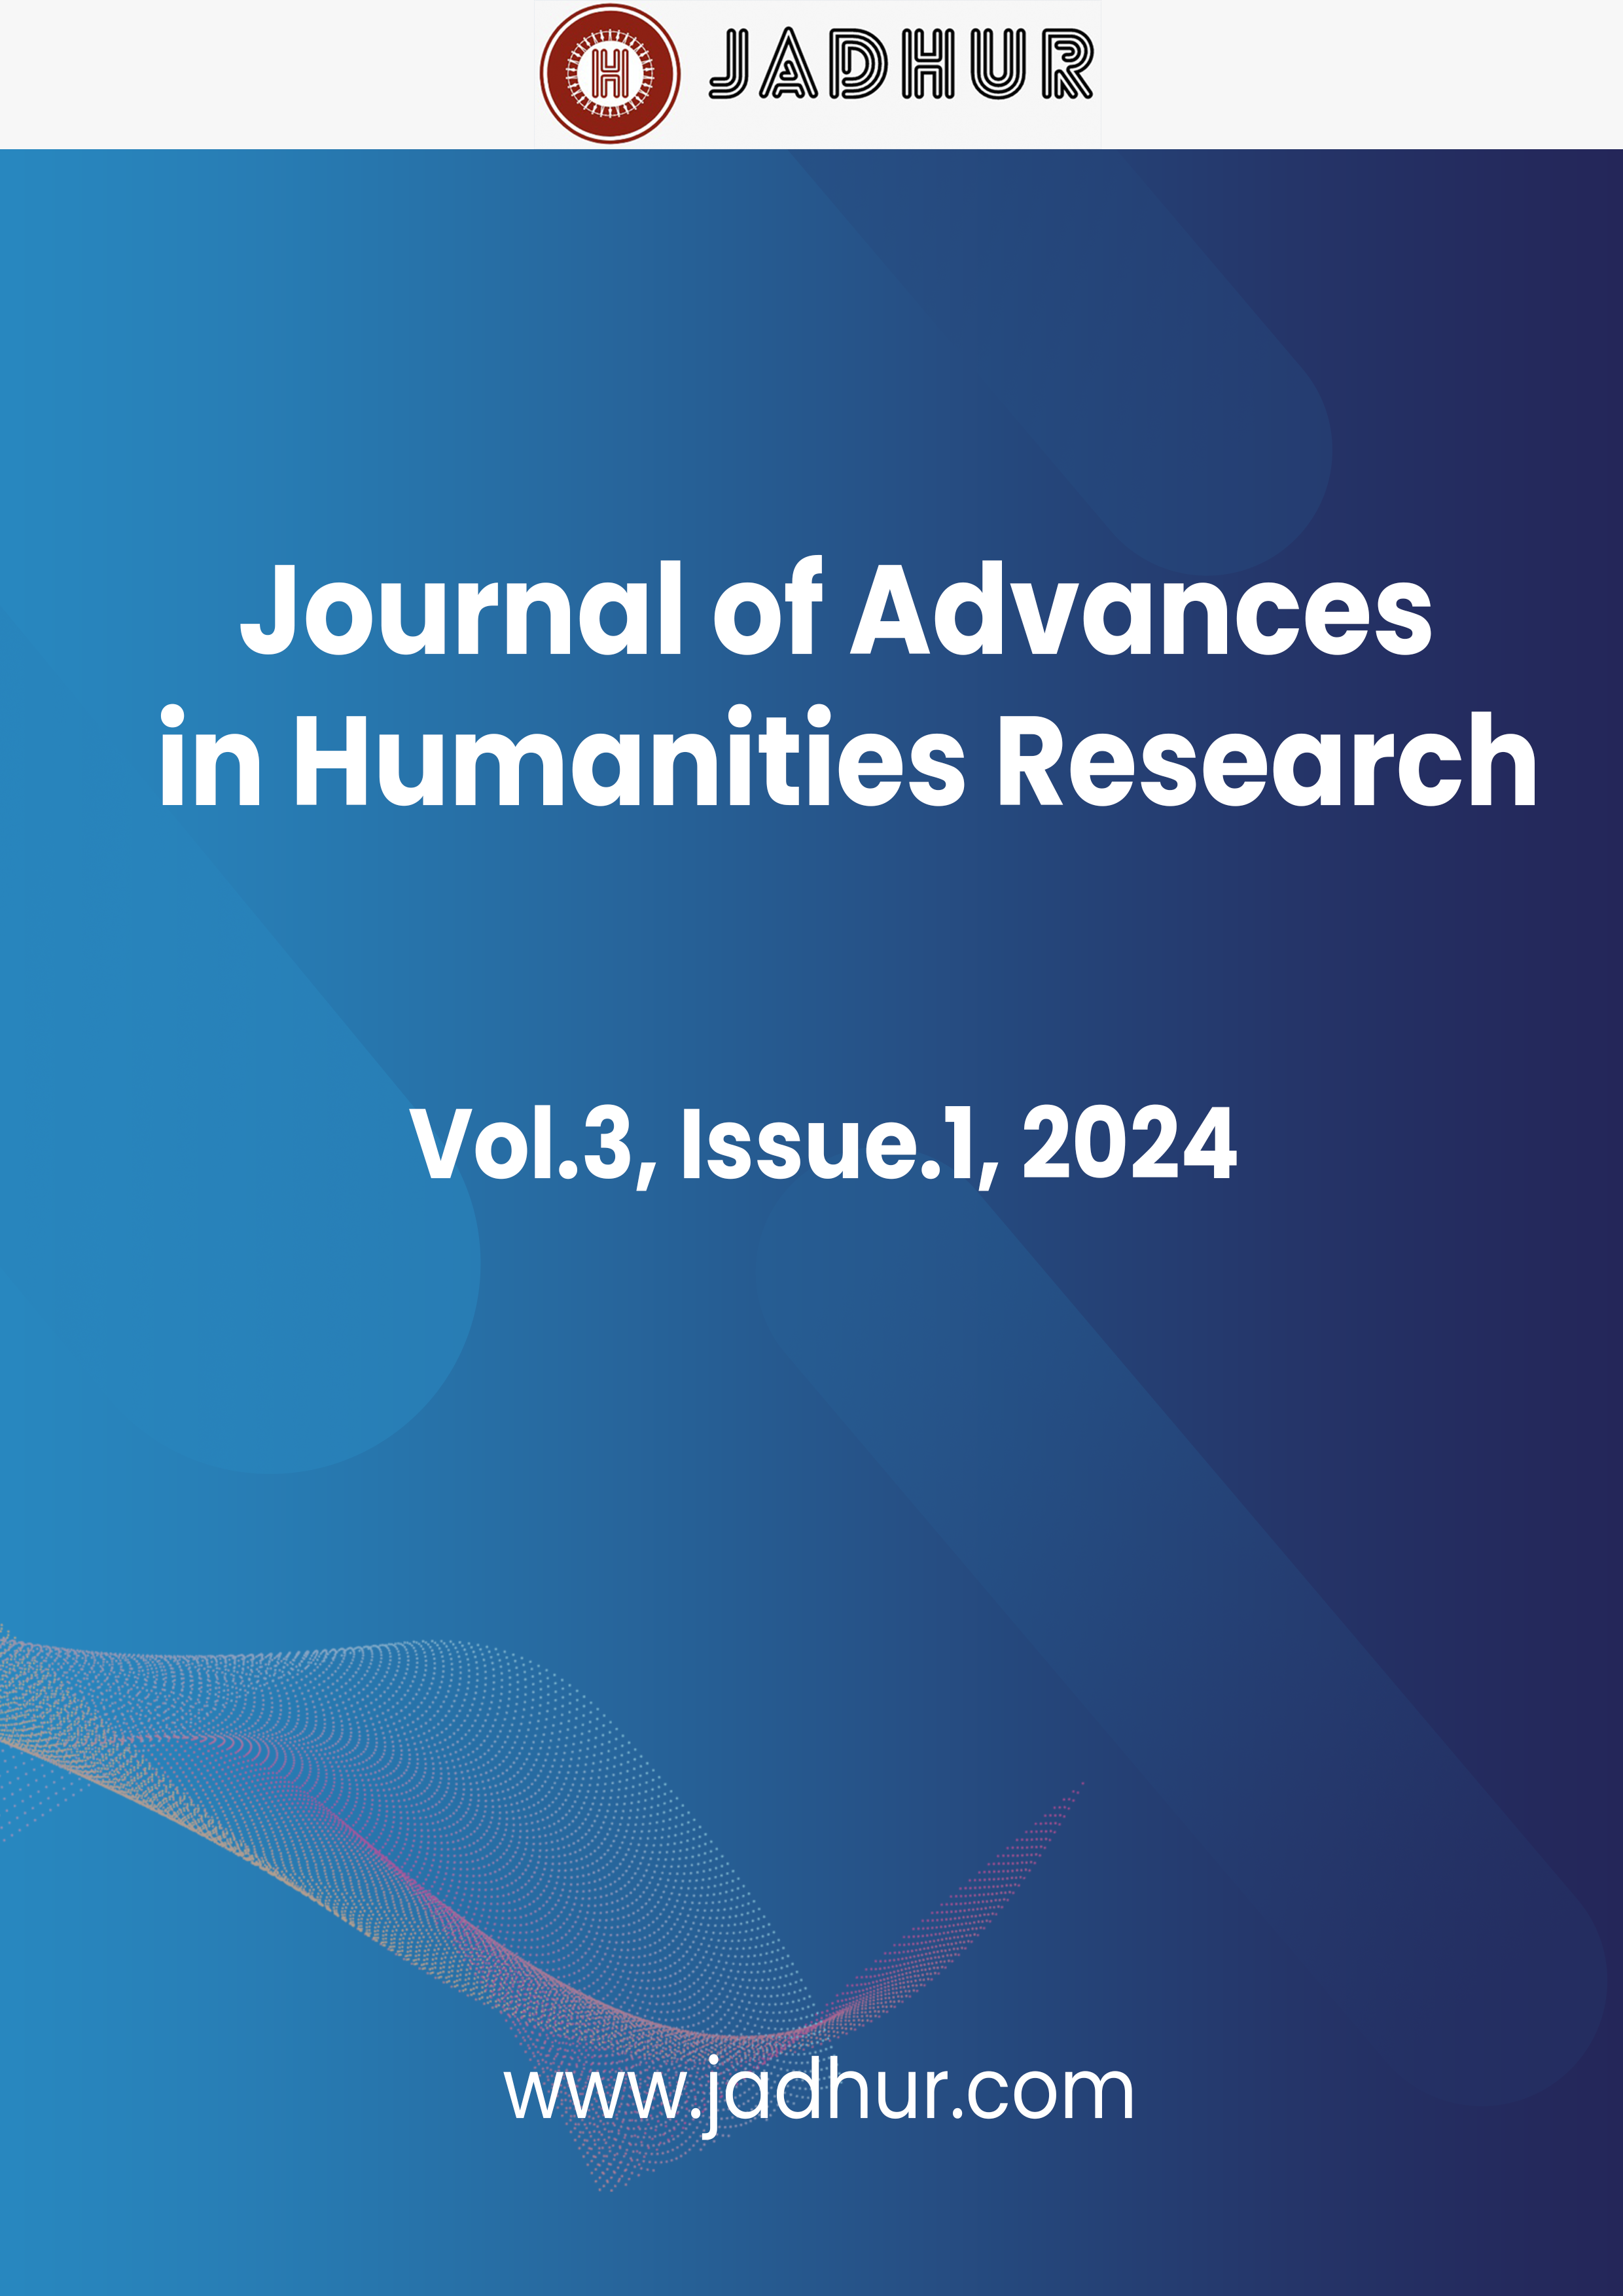 					View Vol. 3 No. 1 (2024): Journal of Advances in Humanities Research
				